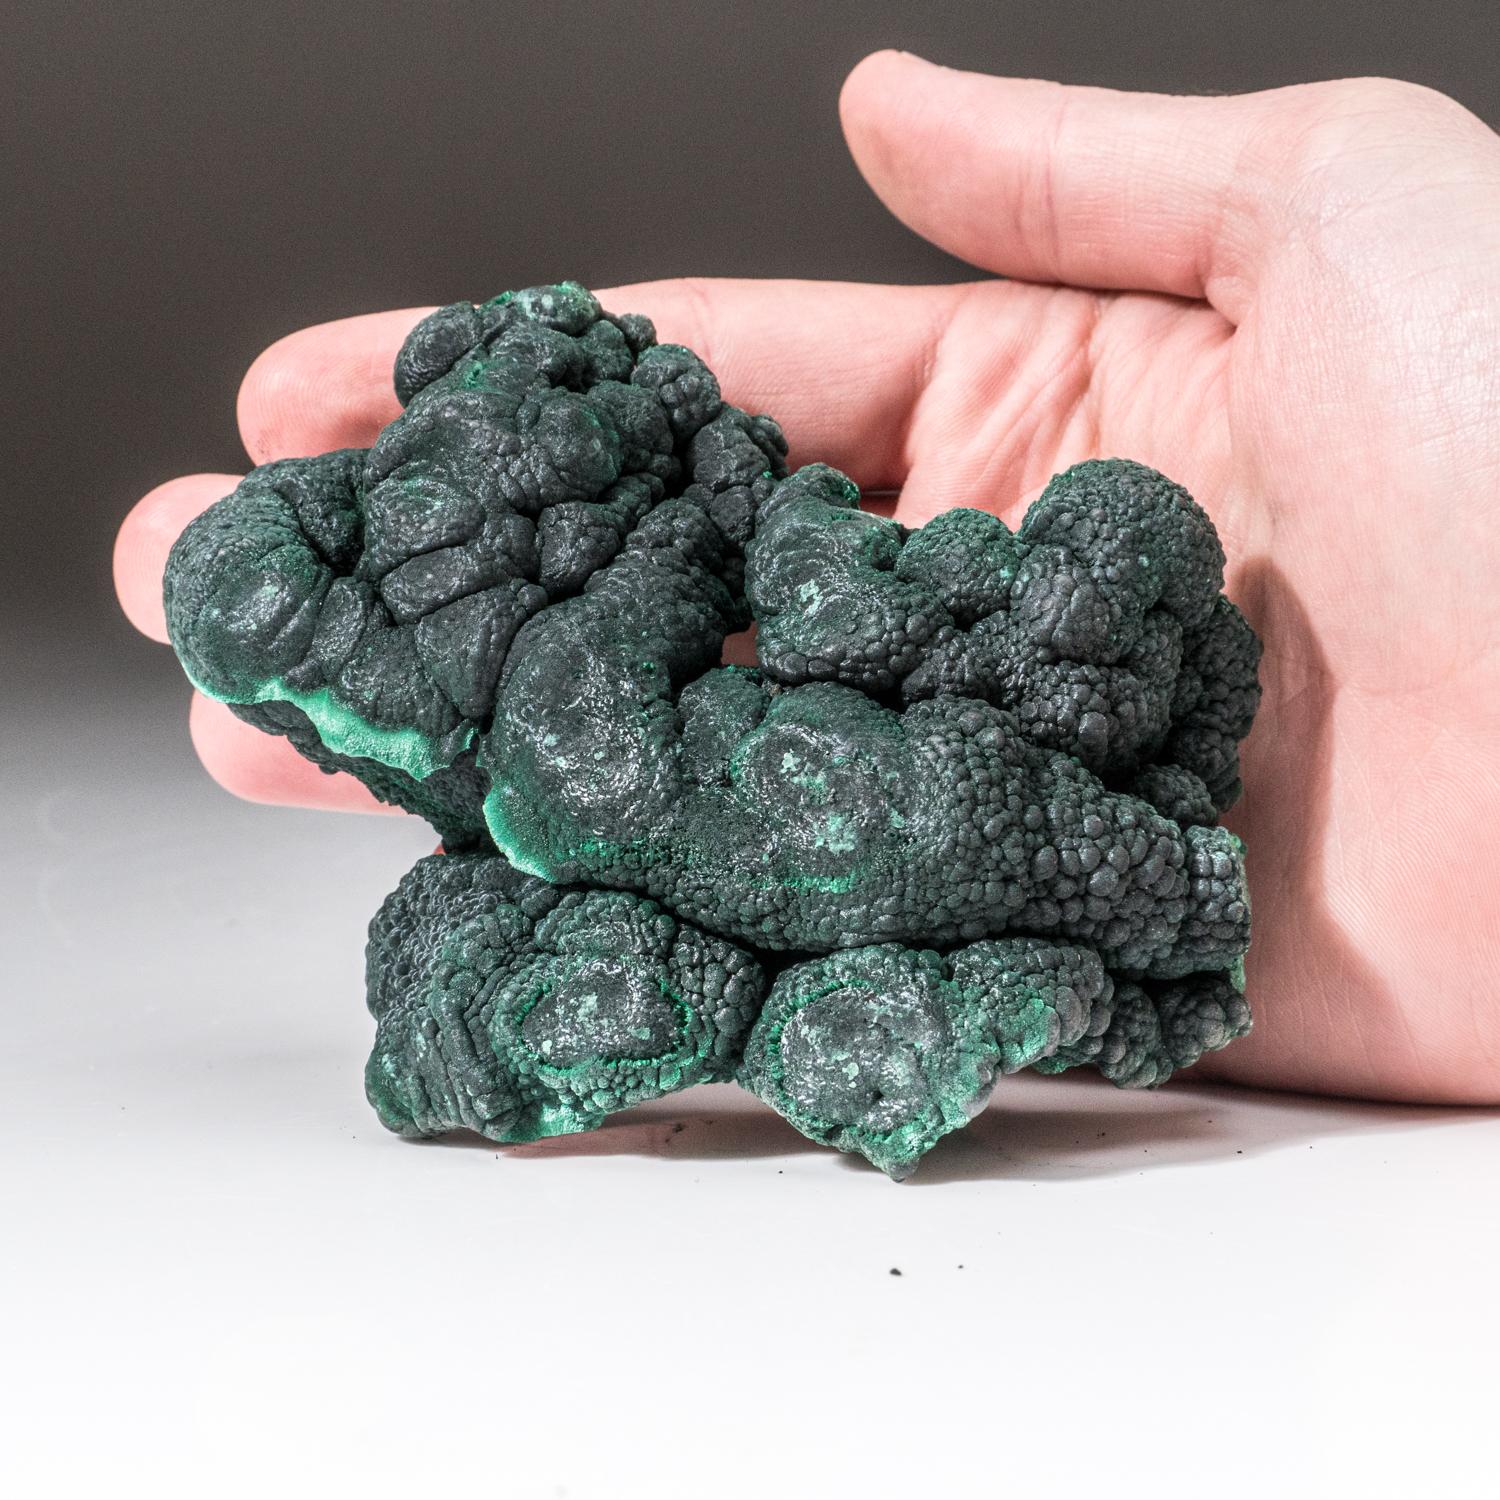 From Shaba Copper Belt, Katanga (Shaba) Province, Democratic Republic of the Congo (Zaire) A sculptural botryoidal formation of solid velvety green malachite from the famous copper mines of Shaba. Beautiful lustrous even green color all throughout